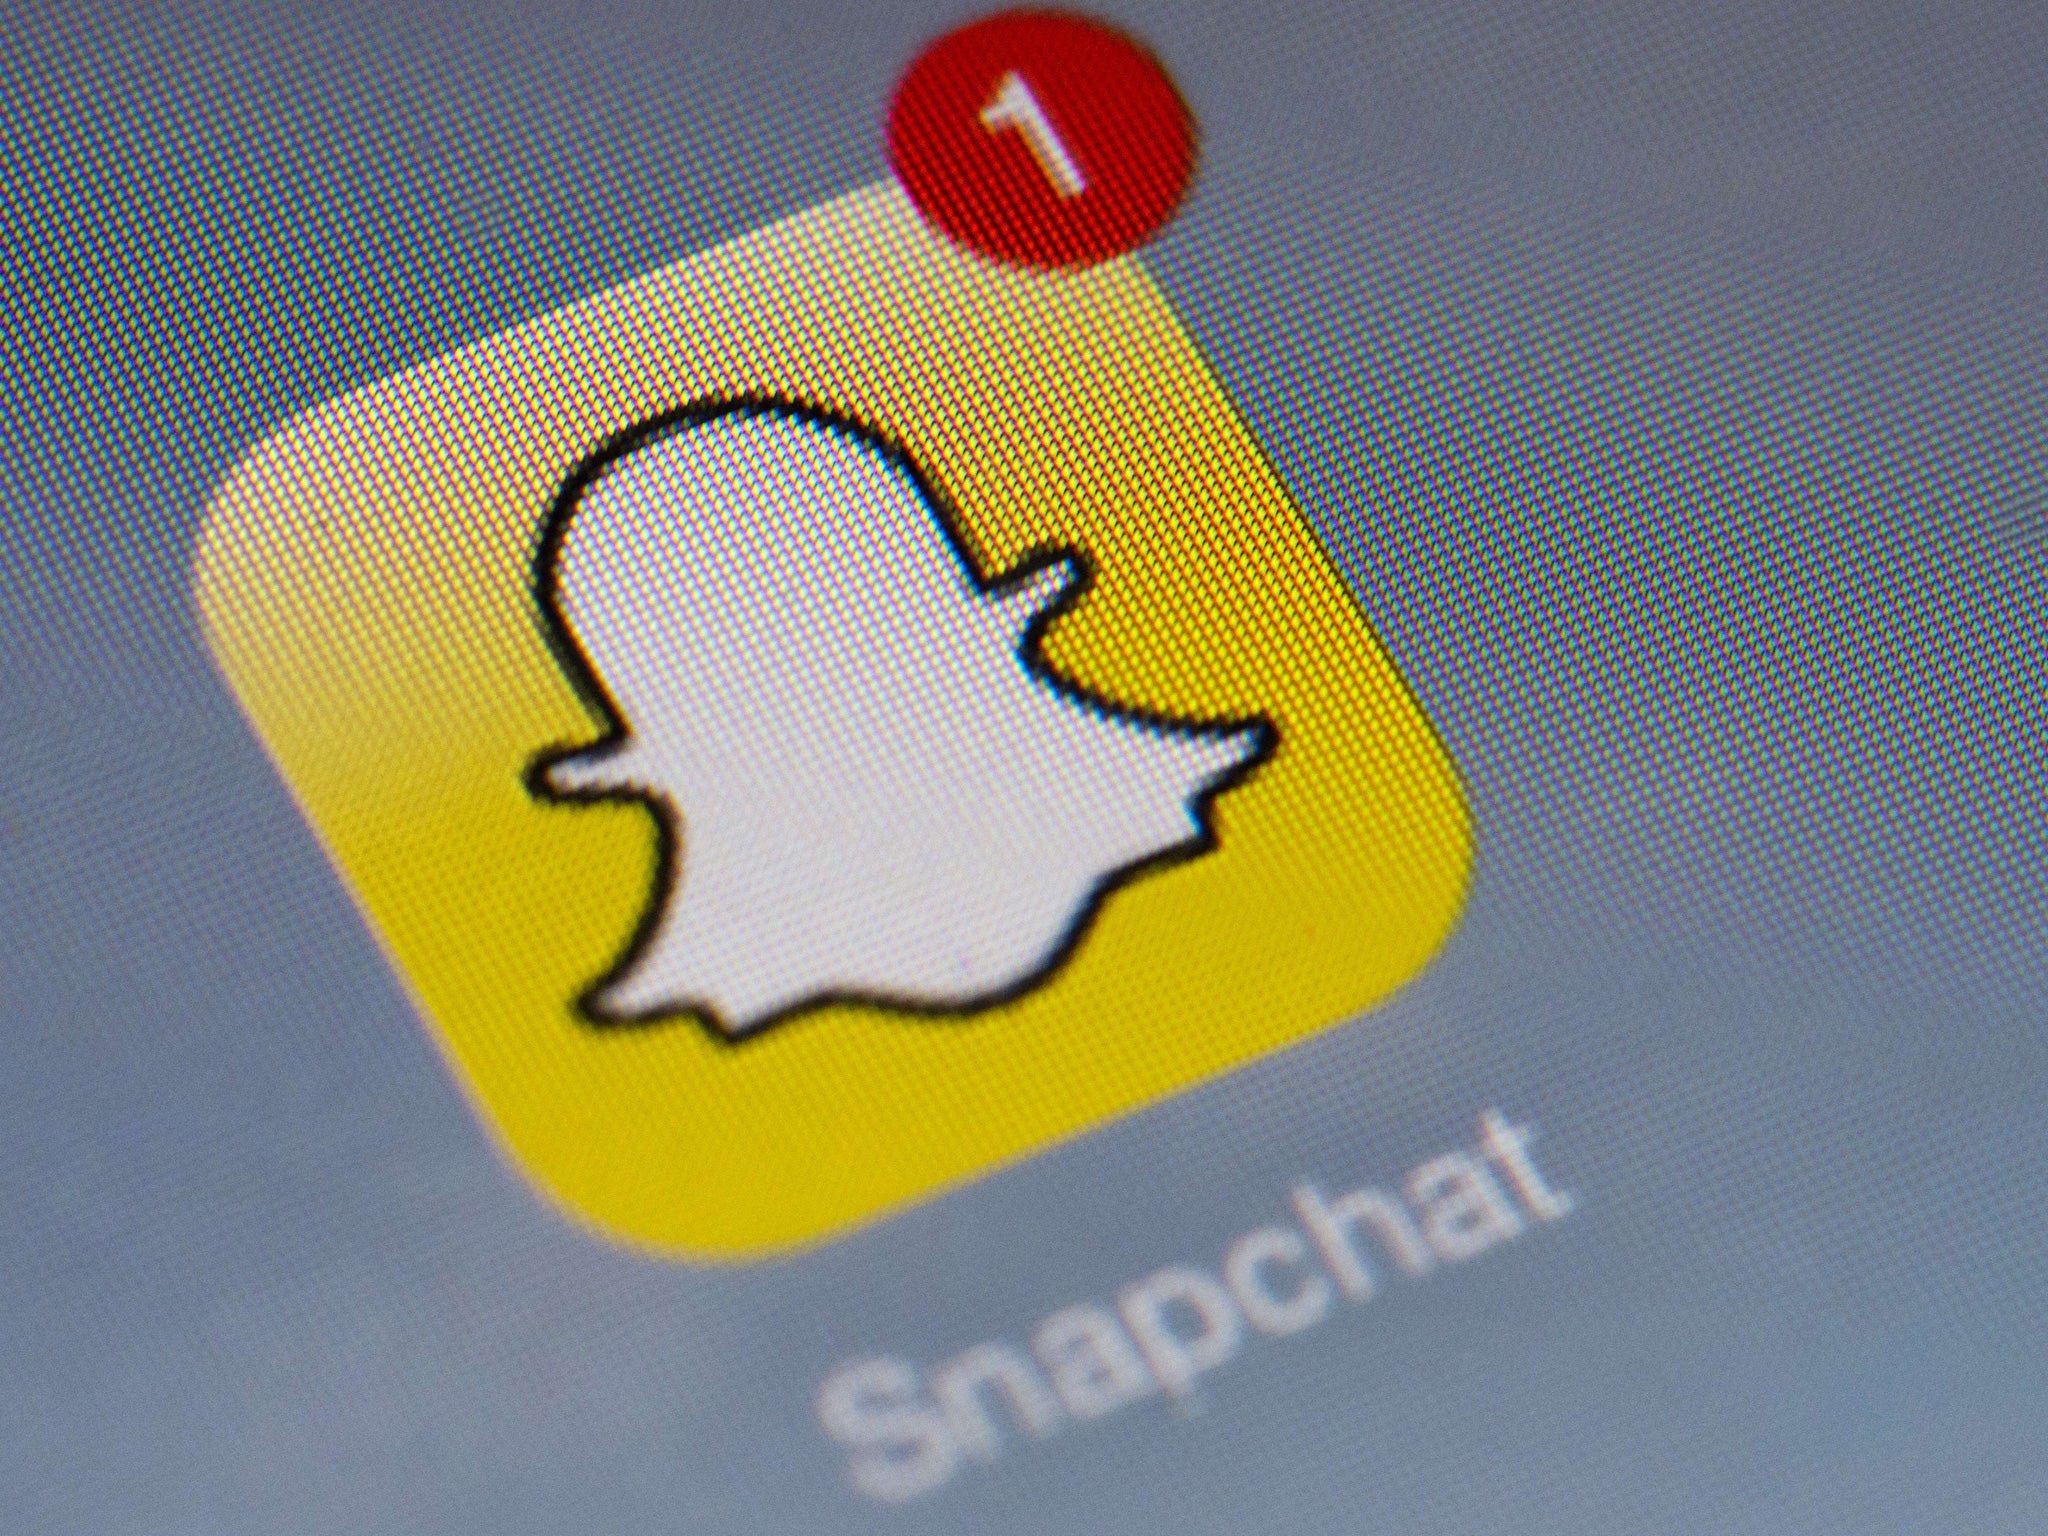 A video of the children fighting was allegedly shared on Snapchat